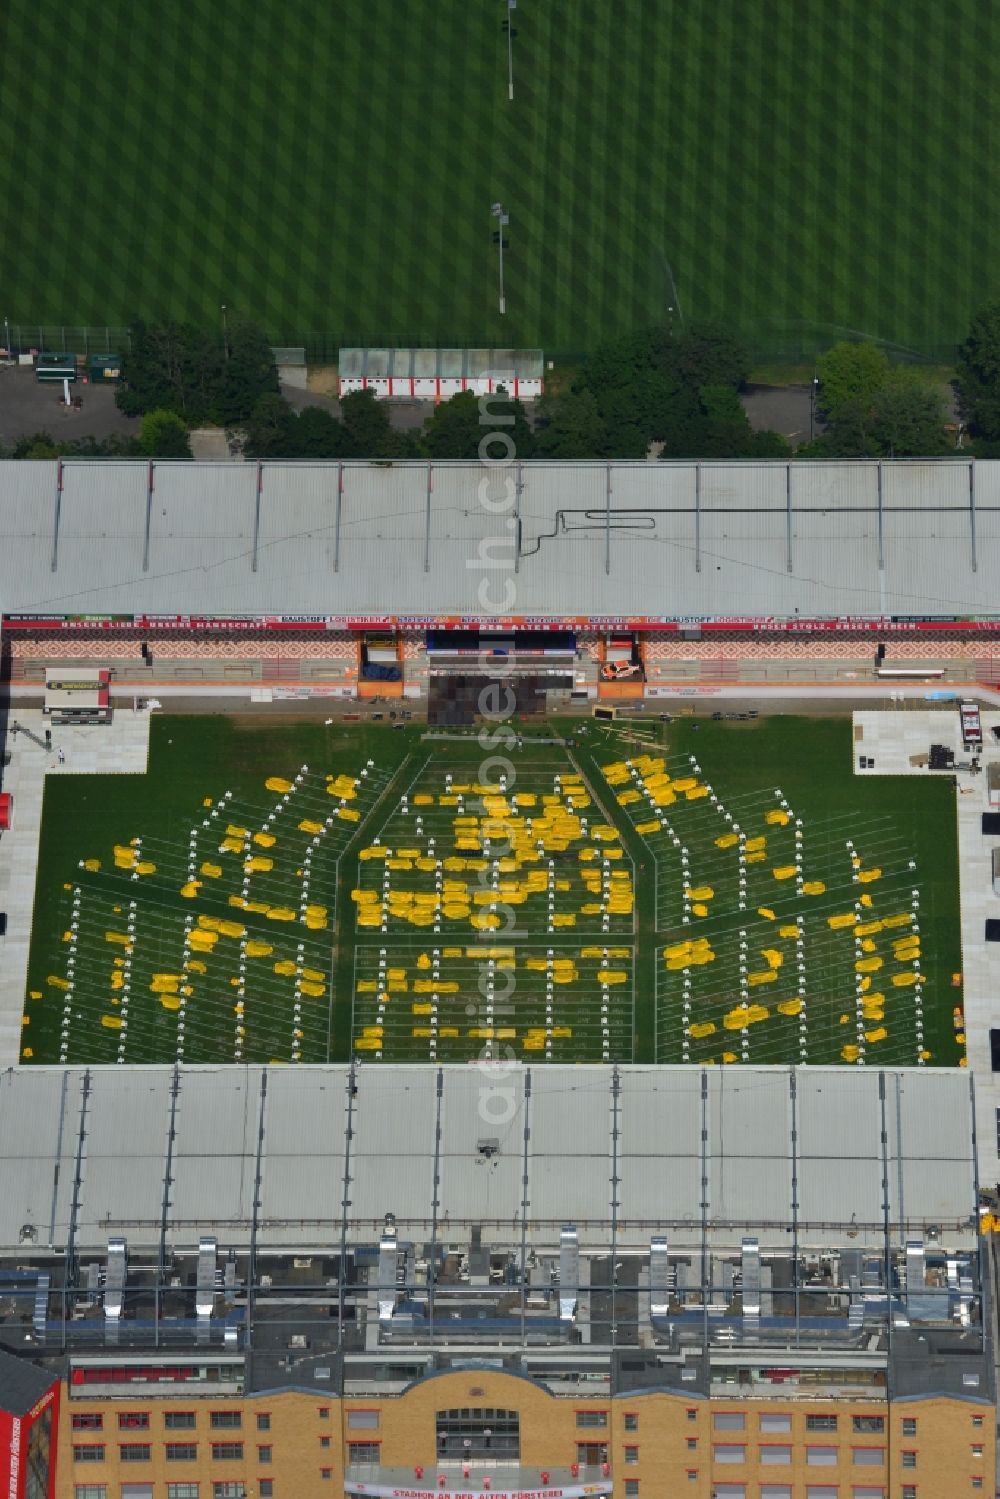 Berlin Köpenick from above - Yellow rows of seats for public viewing on the occasion of World Cup Football World Cup 2014 in Union Stadium in Berlin - Koepenick